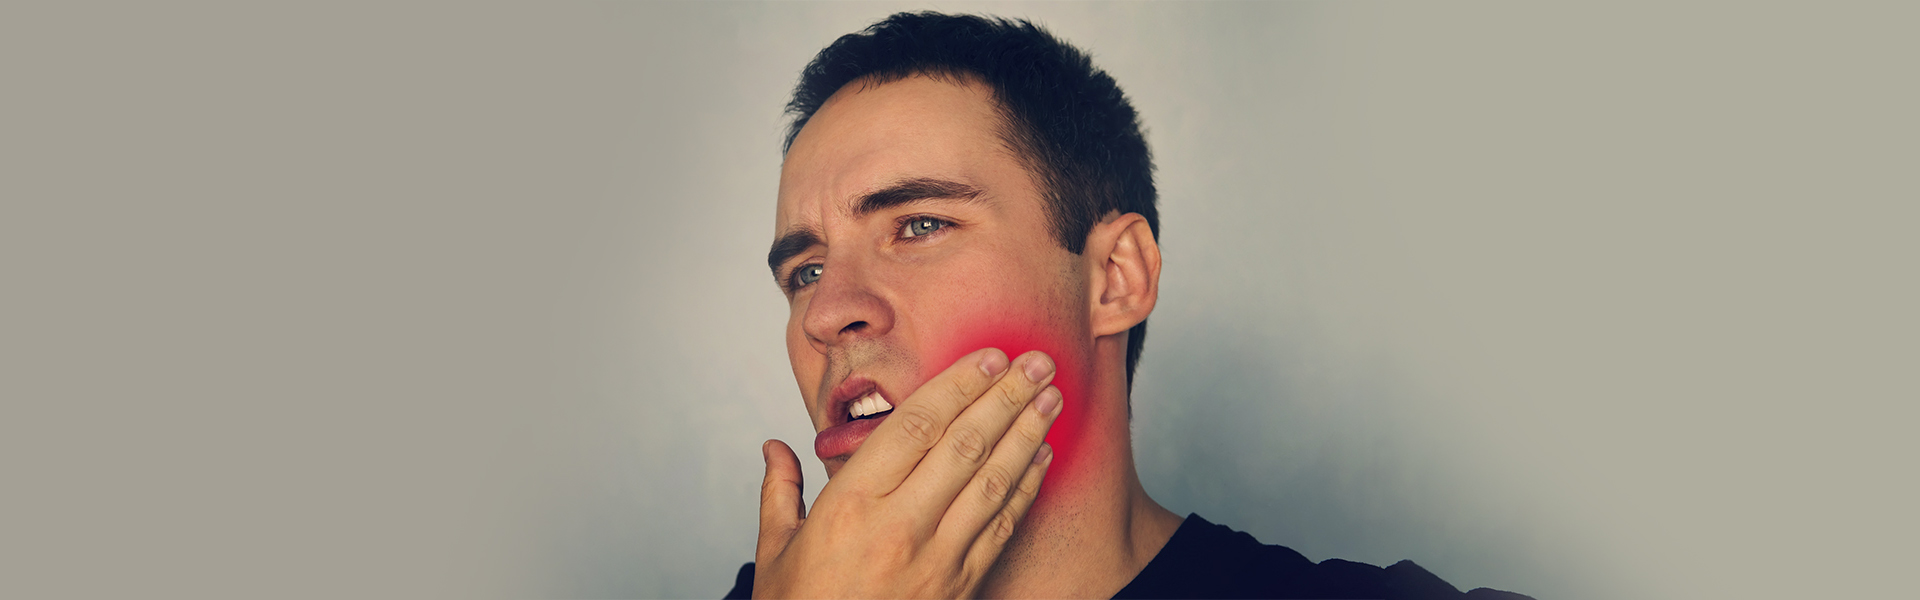 How Long Can A Tooth Infection Go Without Treatment?